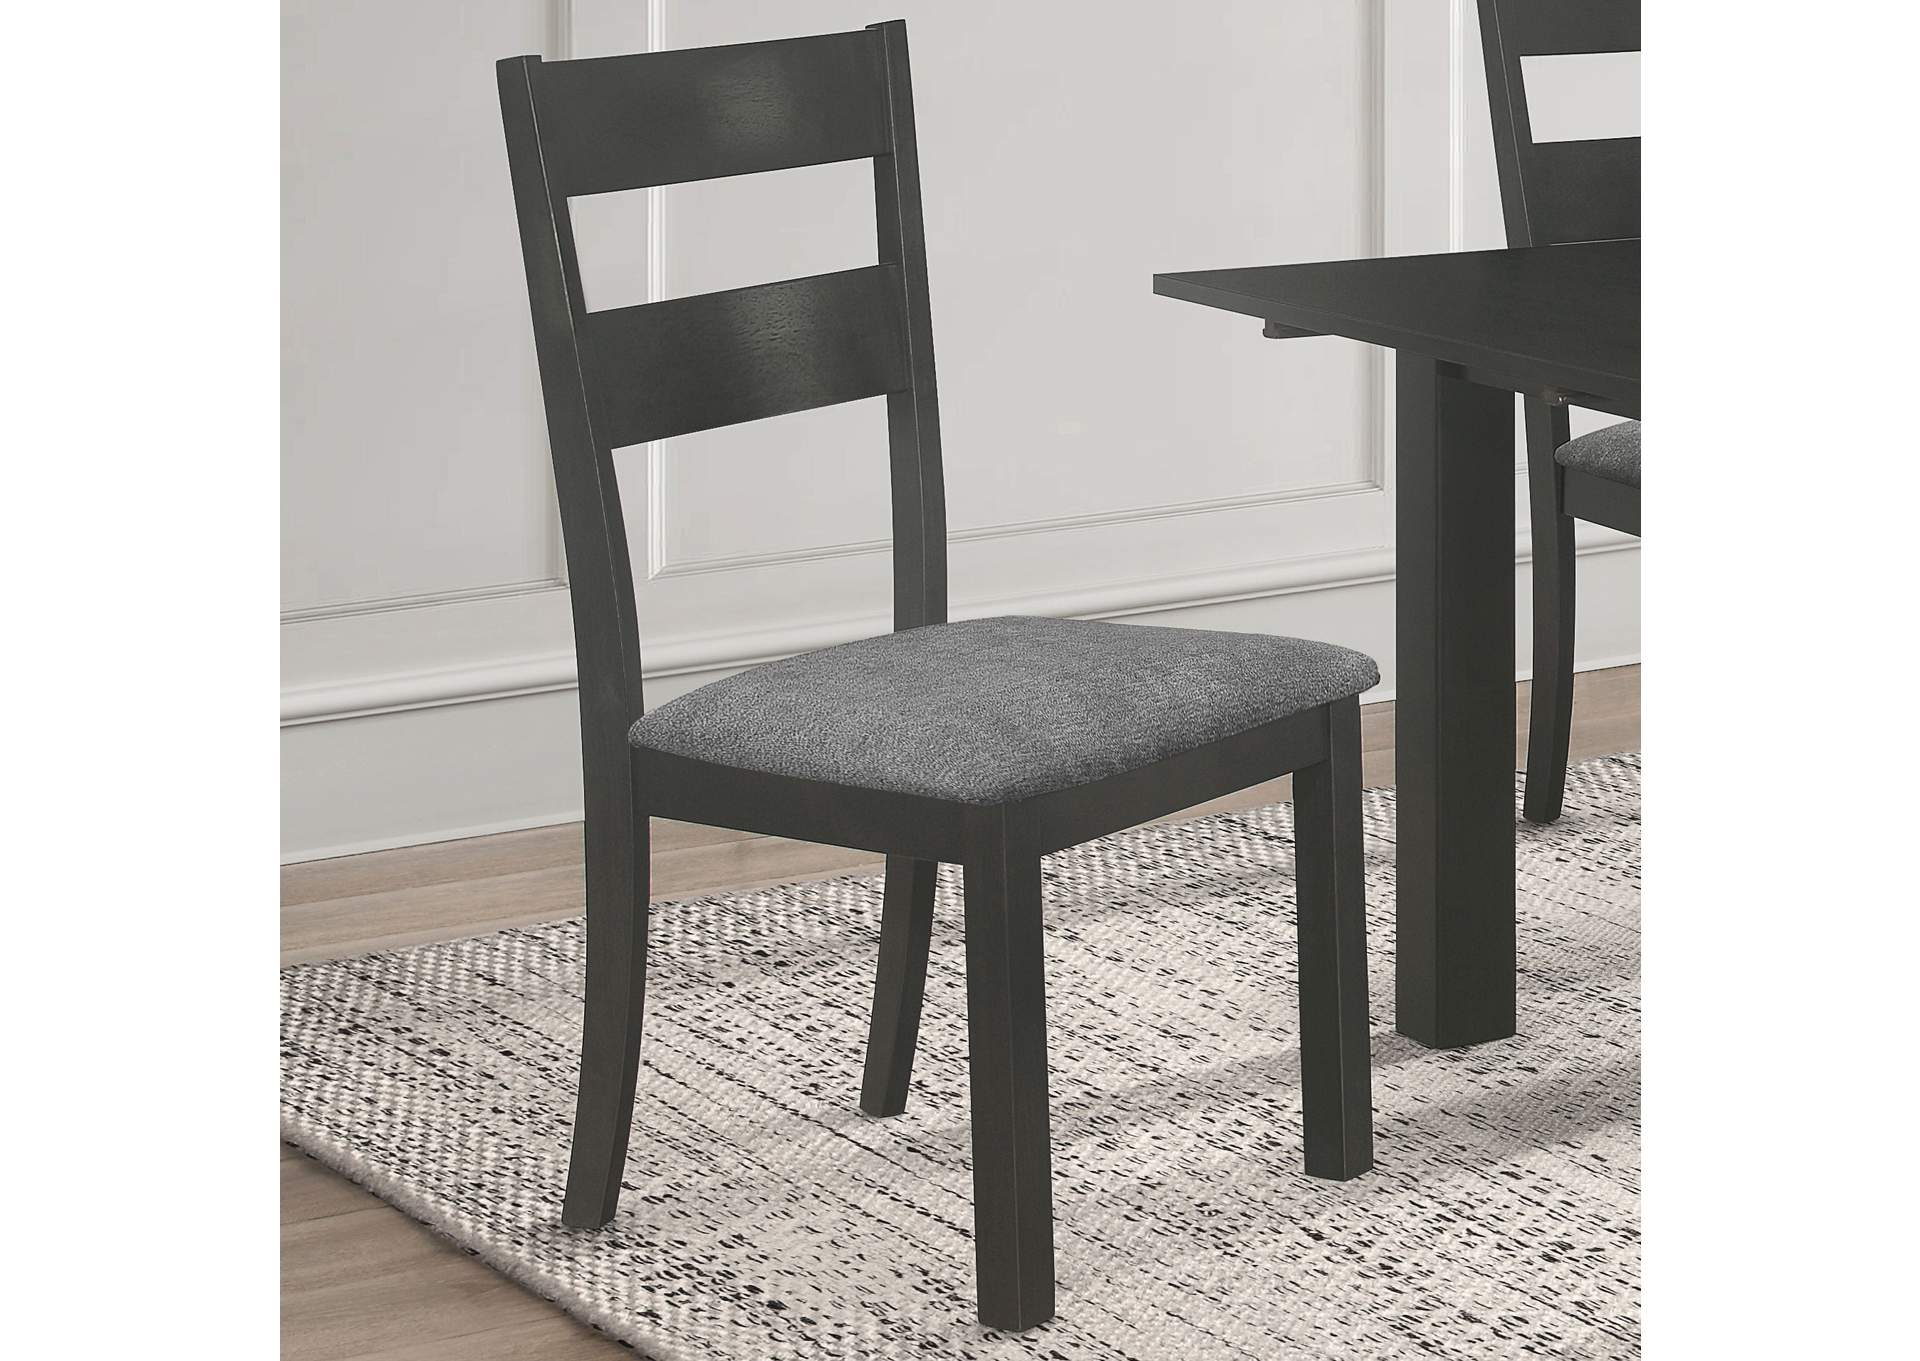 Jakob Upholstered Side Chairs with Ladder Back (Set of 2) Grey and Black,Coaster Furniture